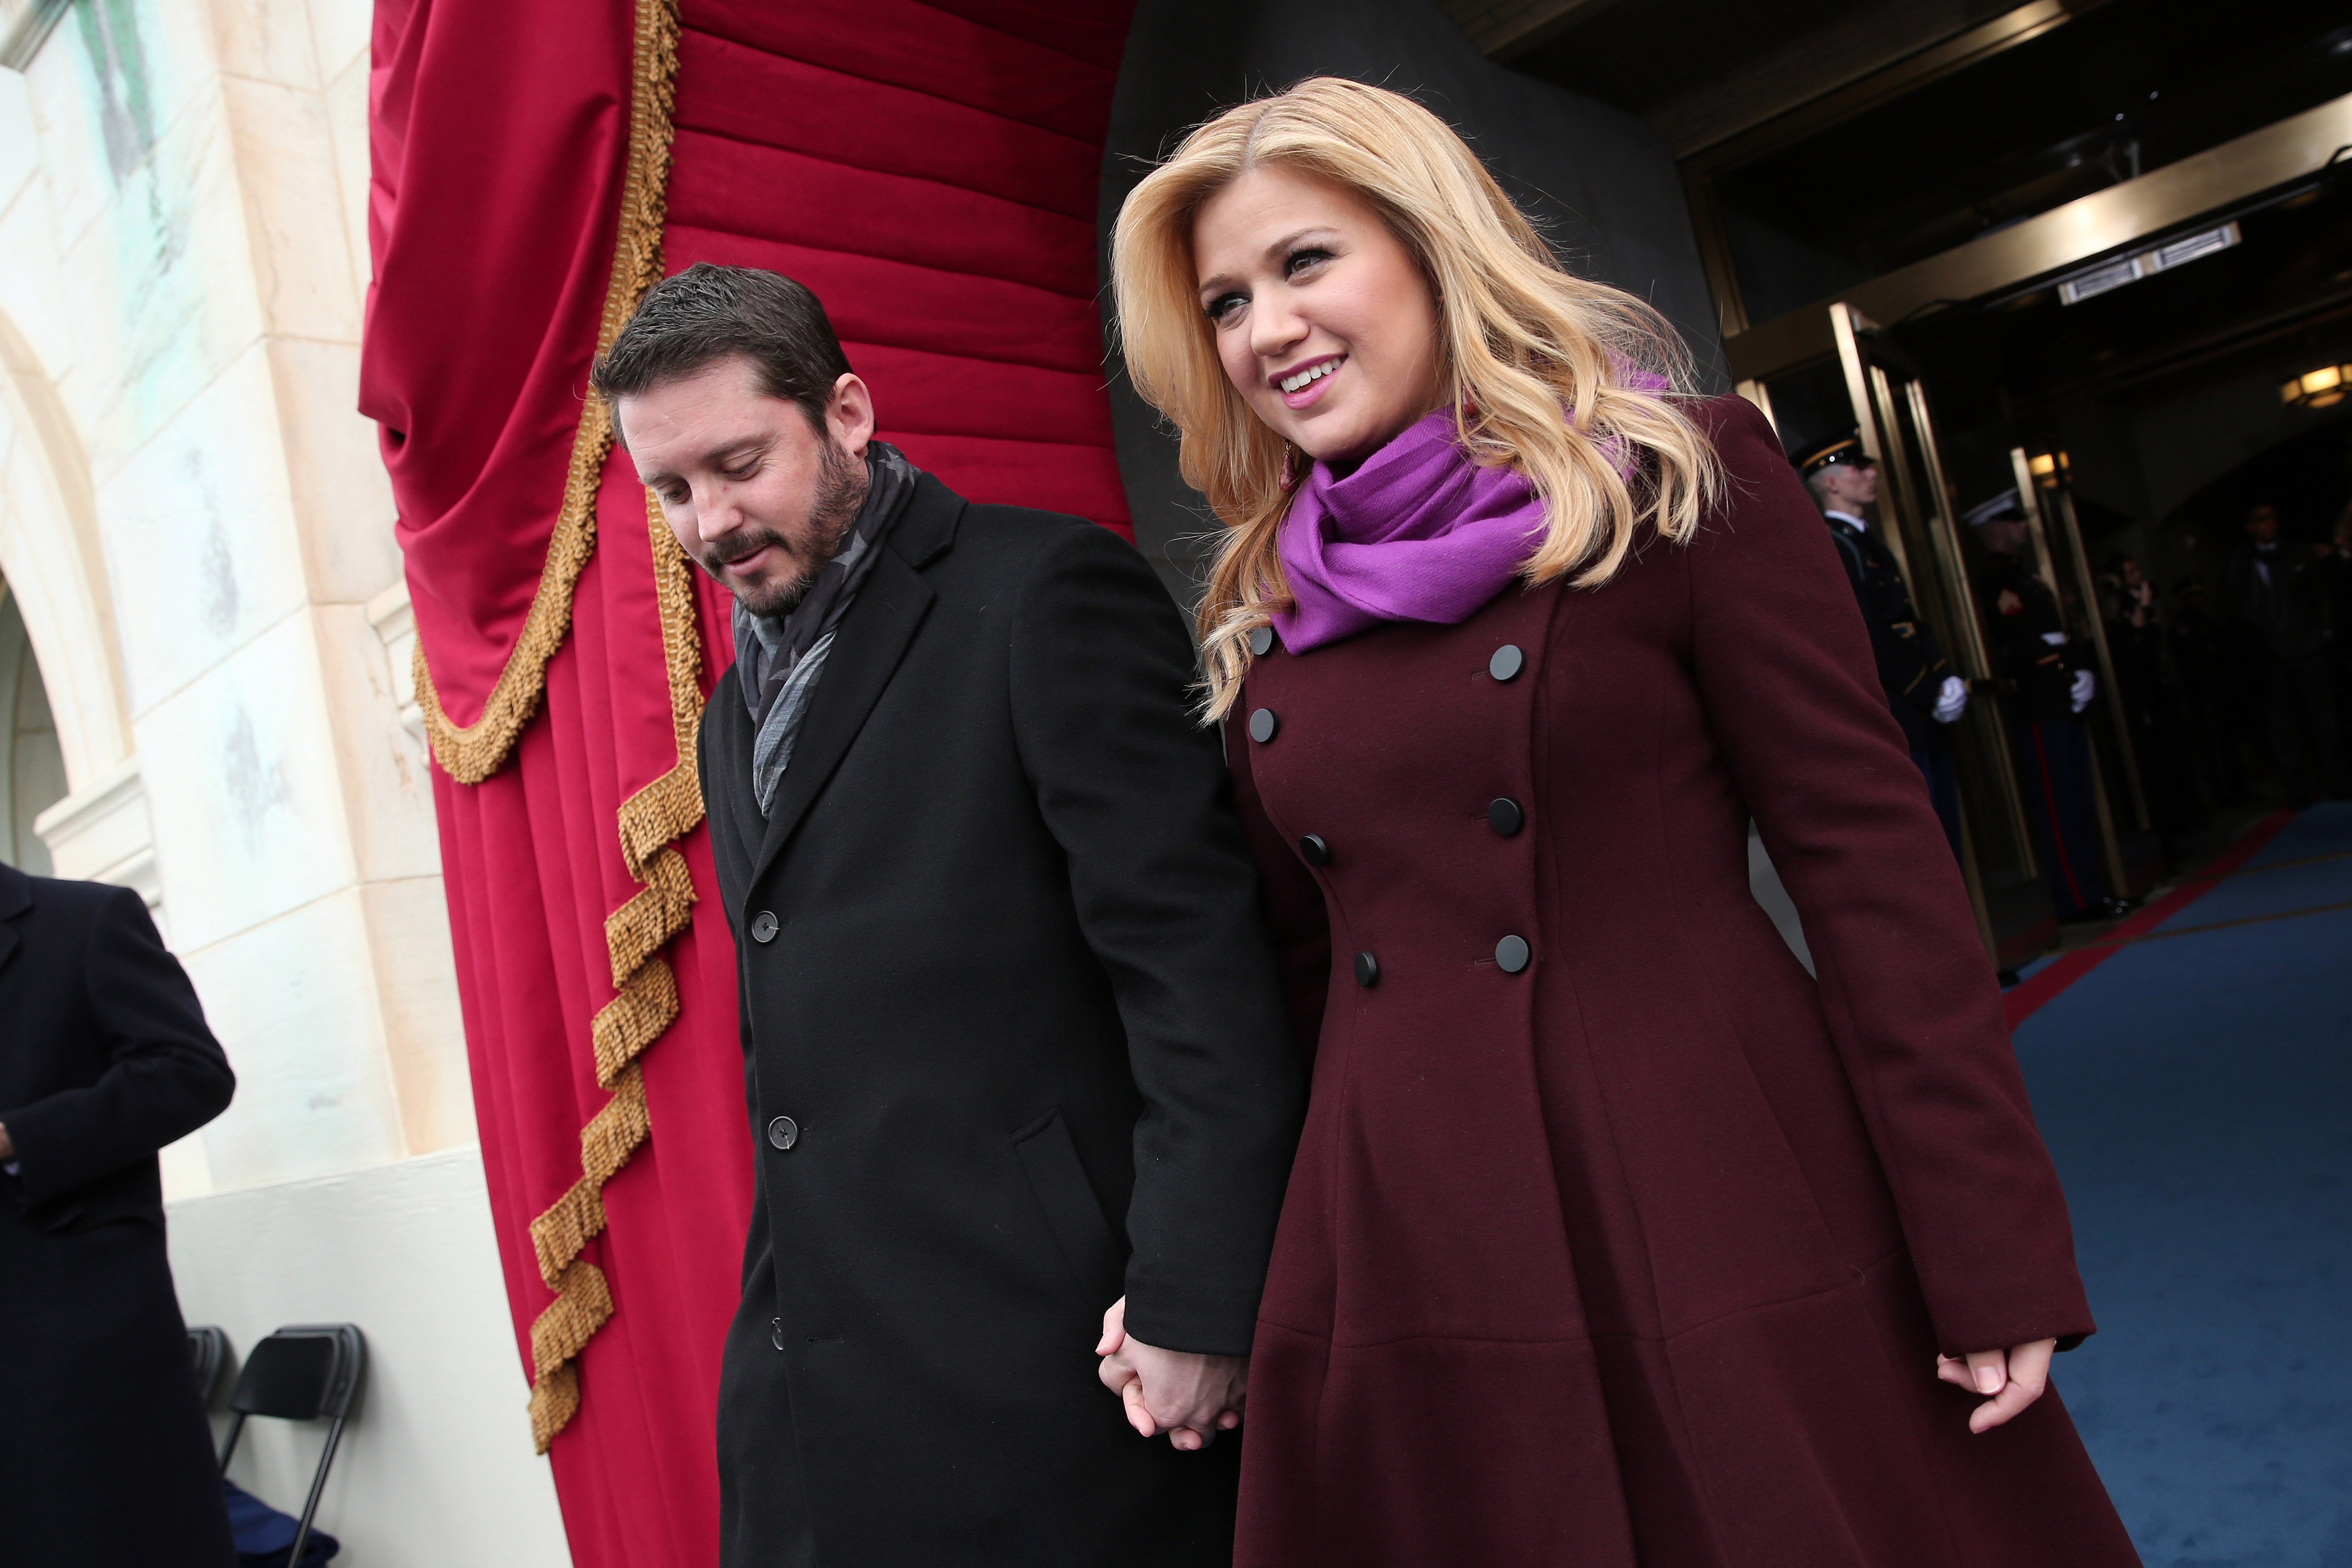 Singer Kelly Clarkson and talent manager Brandon Blackstock arrive at the presidential inauguration on the West Front of the US Capitol on January 21, 2013 in Washington, DC | Source: Getty Images